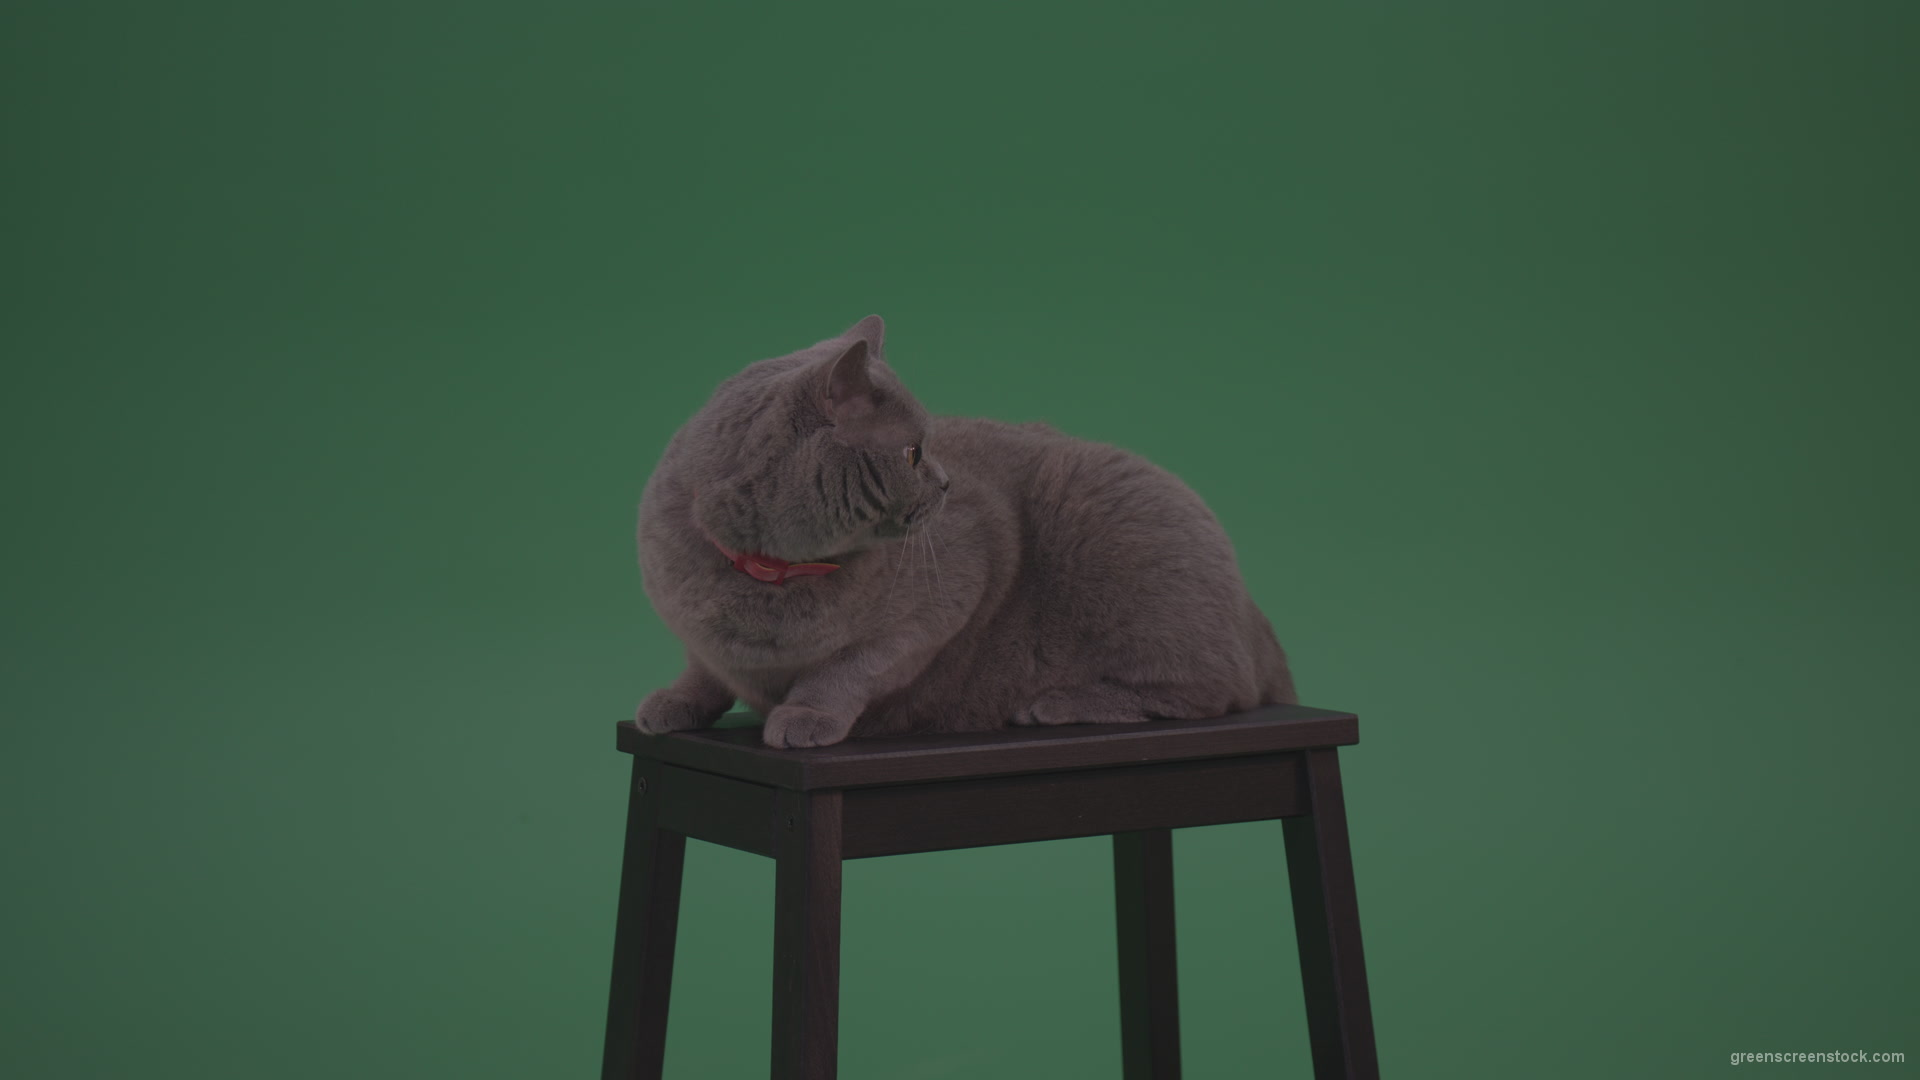 vj video background British-Gey-Cat-Sitting-On-Stool-Wagging-The-Tail-On_Green-Screen-Chroma-Key-Wall-Background_003